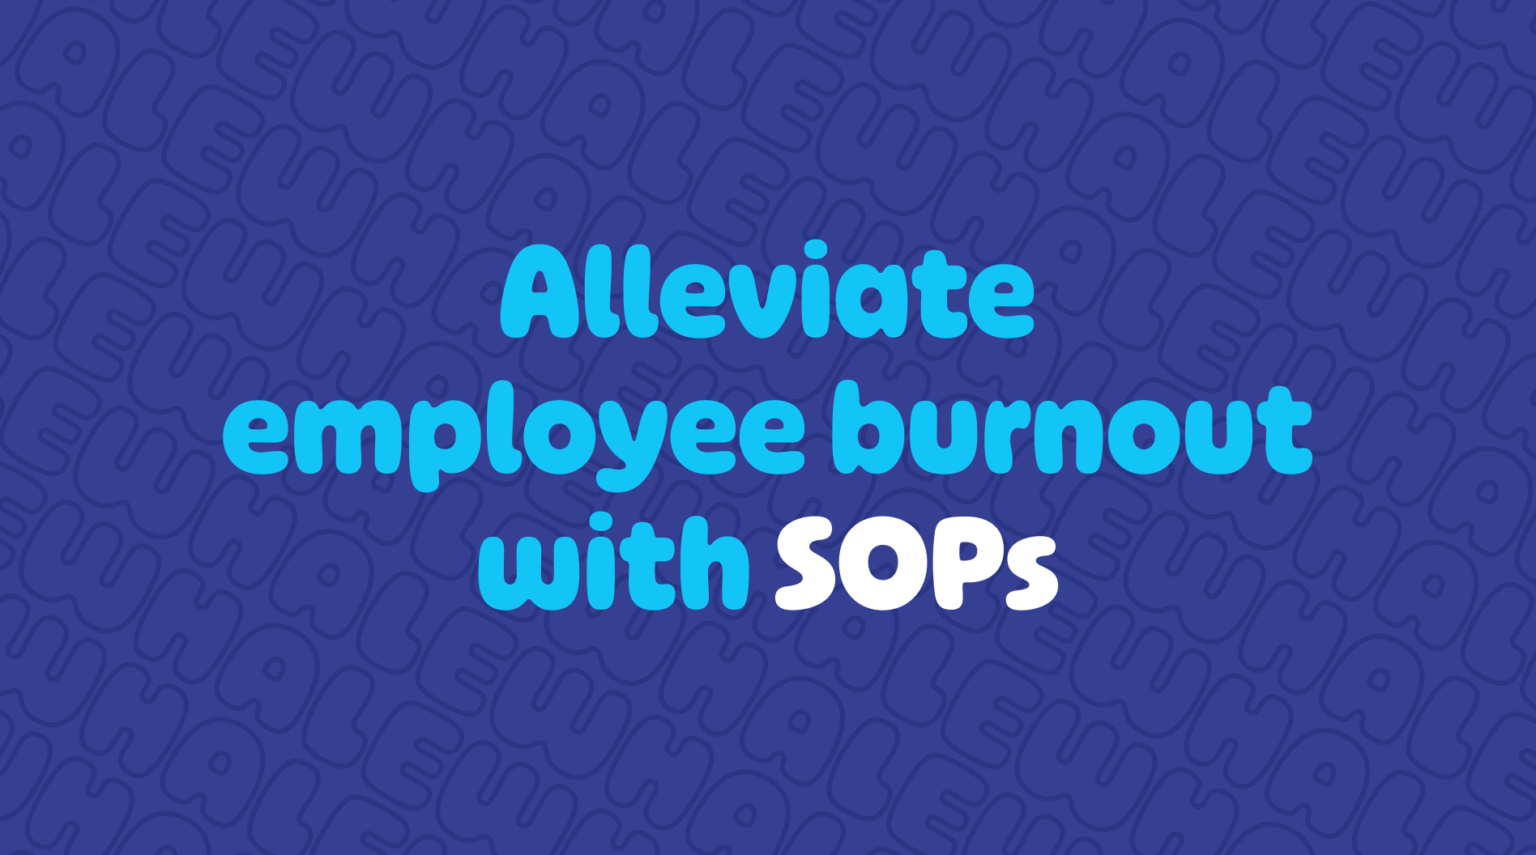 Alleviate employee burnout with SOPs